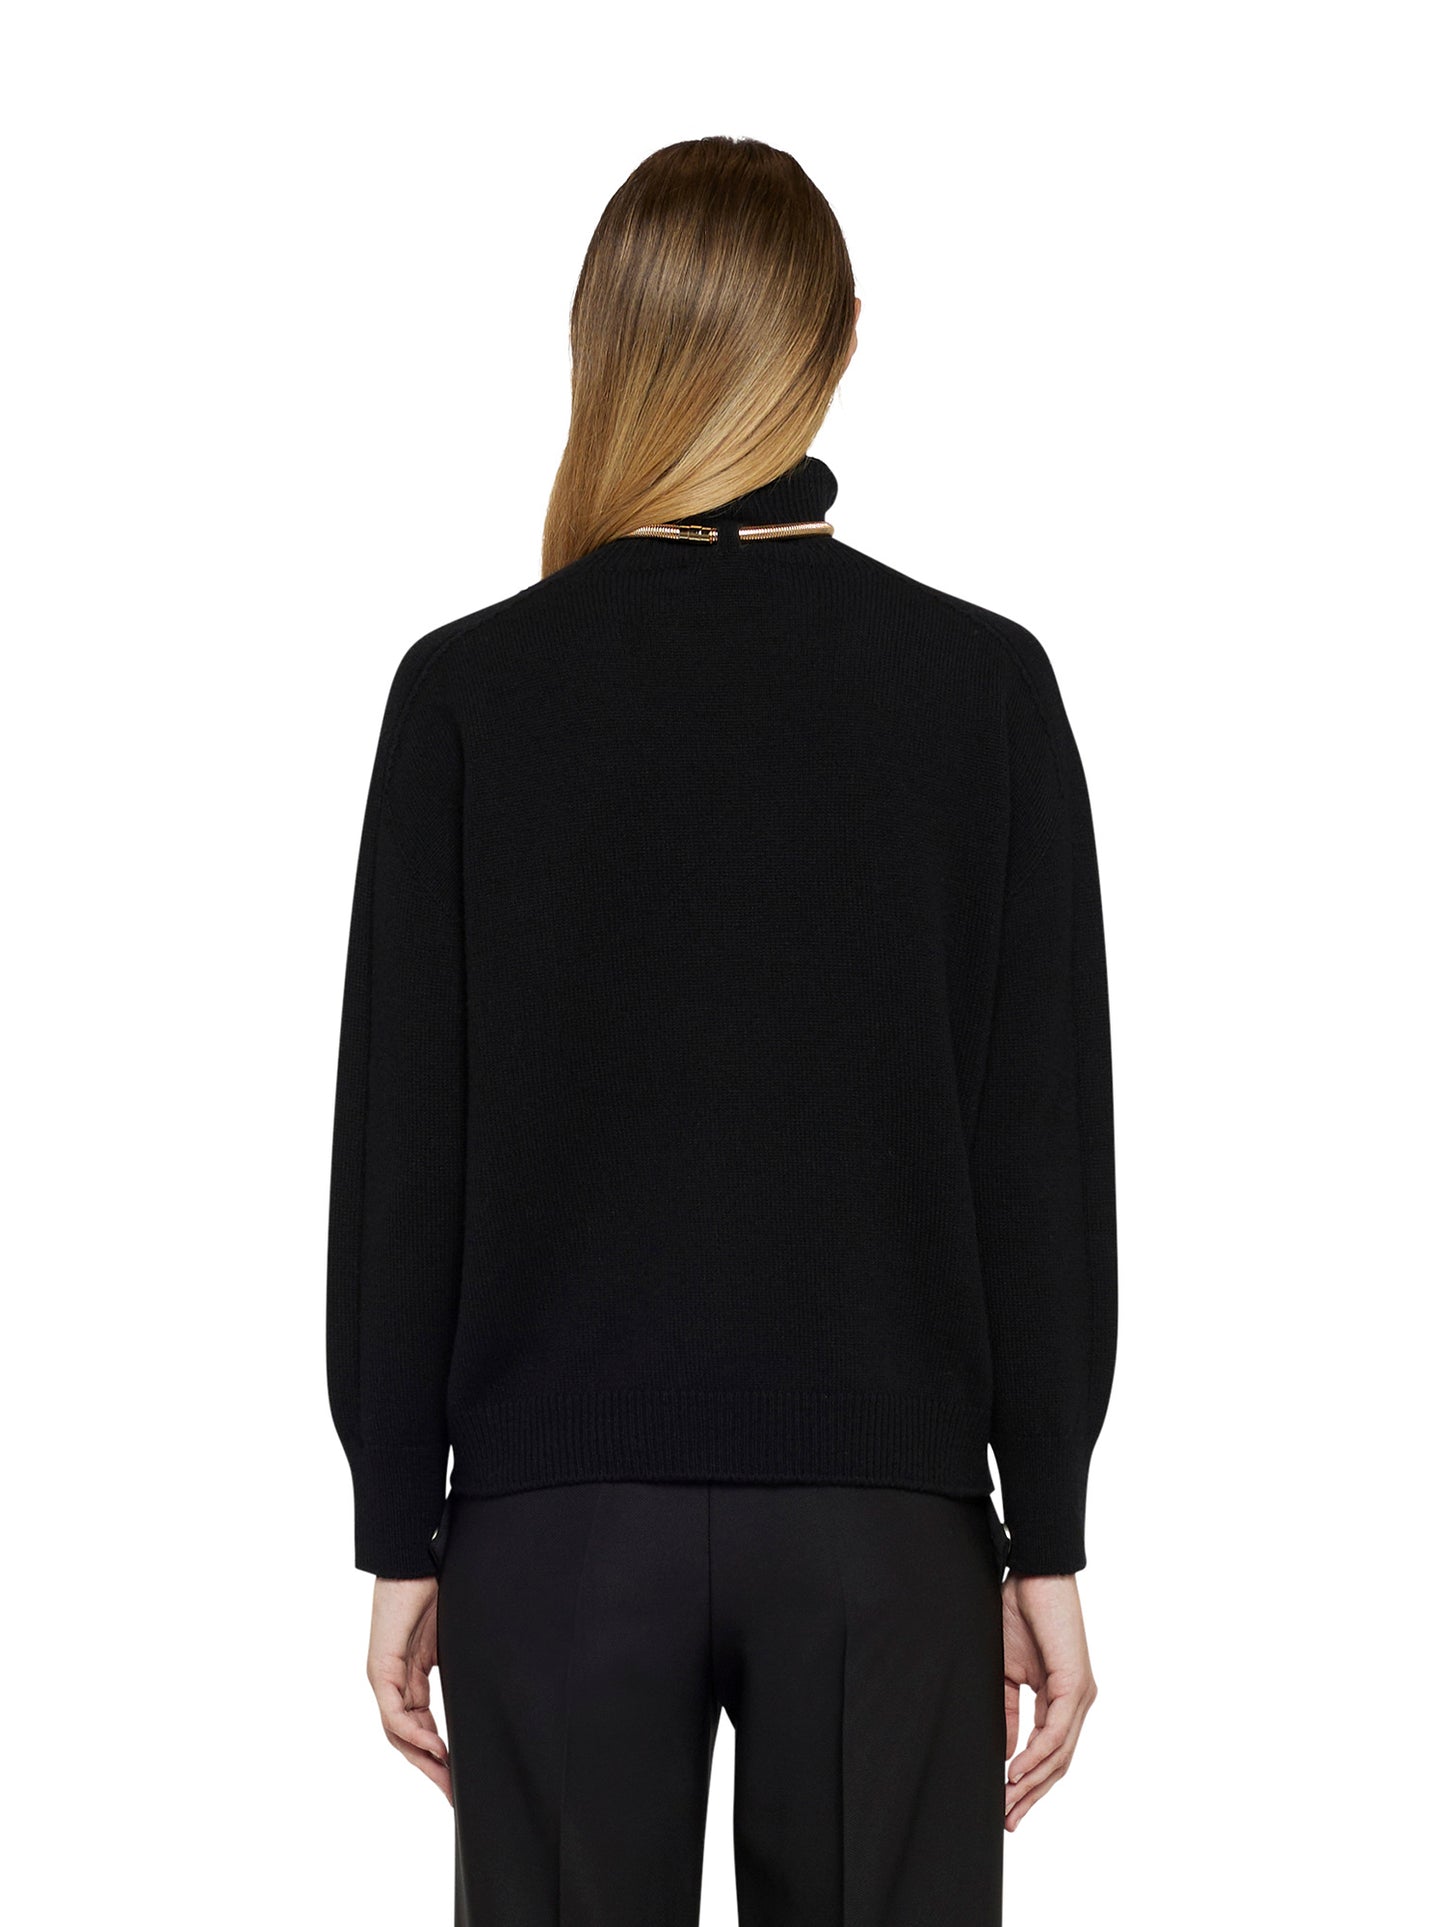 Cashmere wool turtleneck sweater with snake accessory in the collar